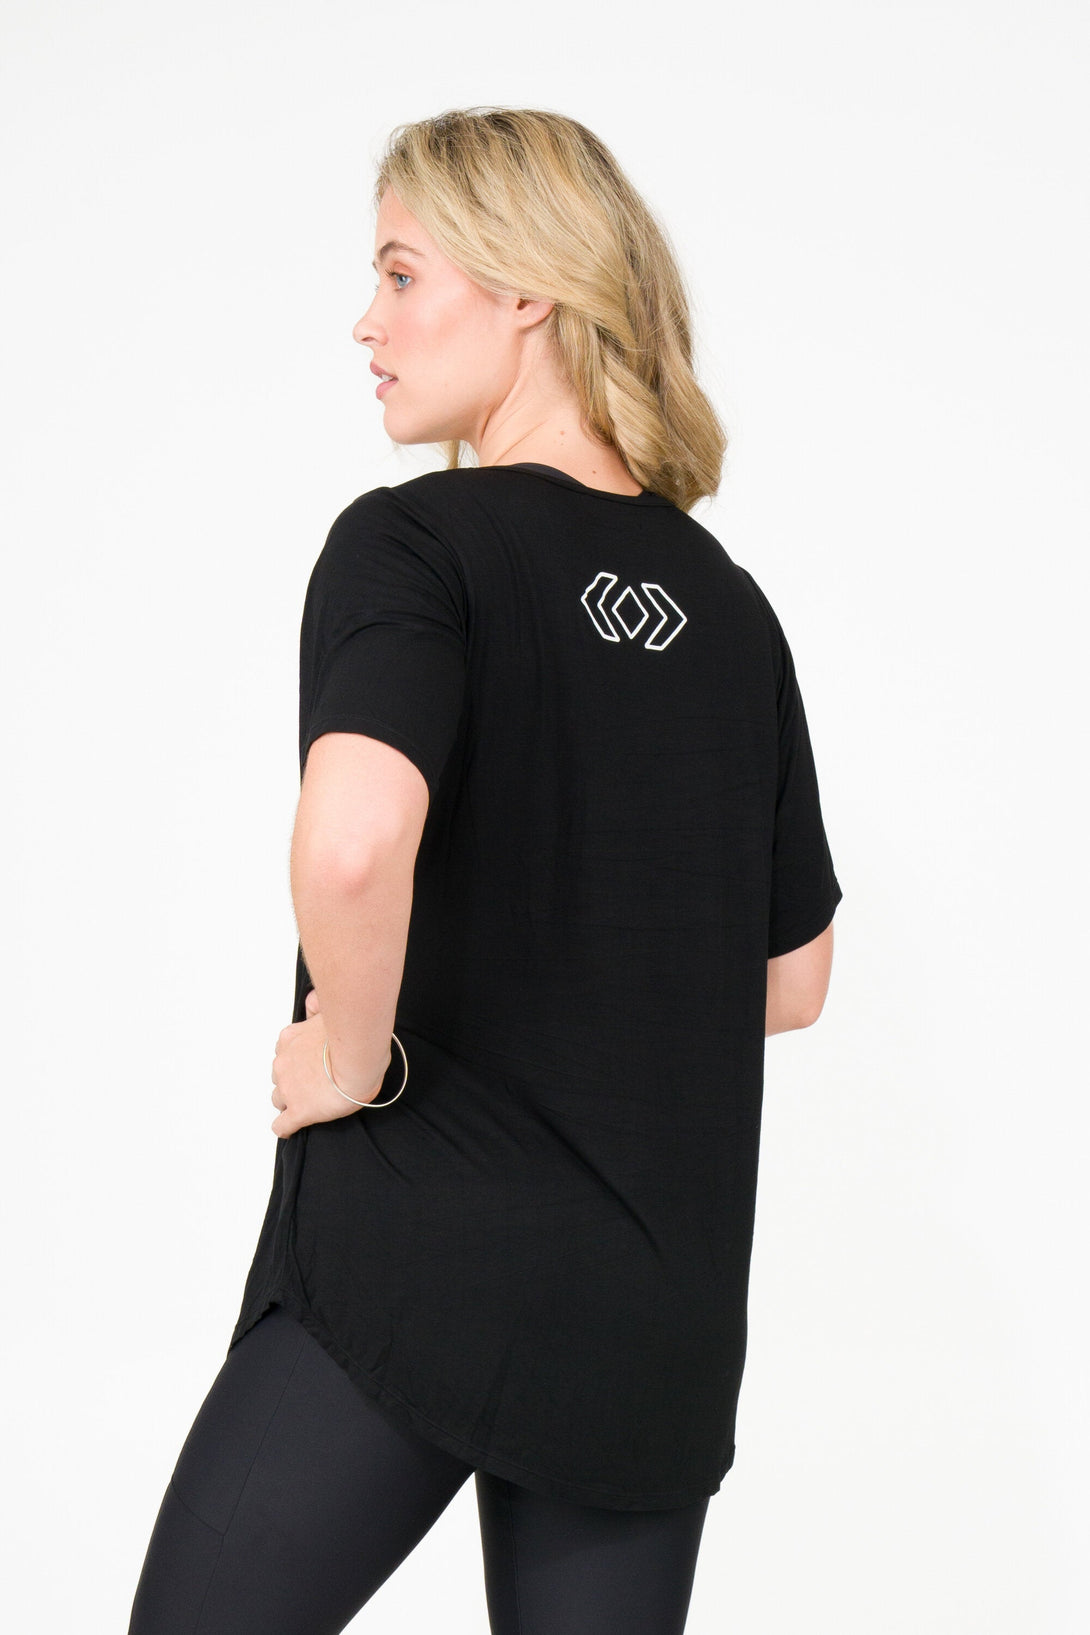 Do It For The Booty Black Slinky To Touch - Plain Boyfriend Tee-Activewear-Exoticathletica